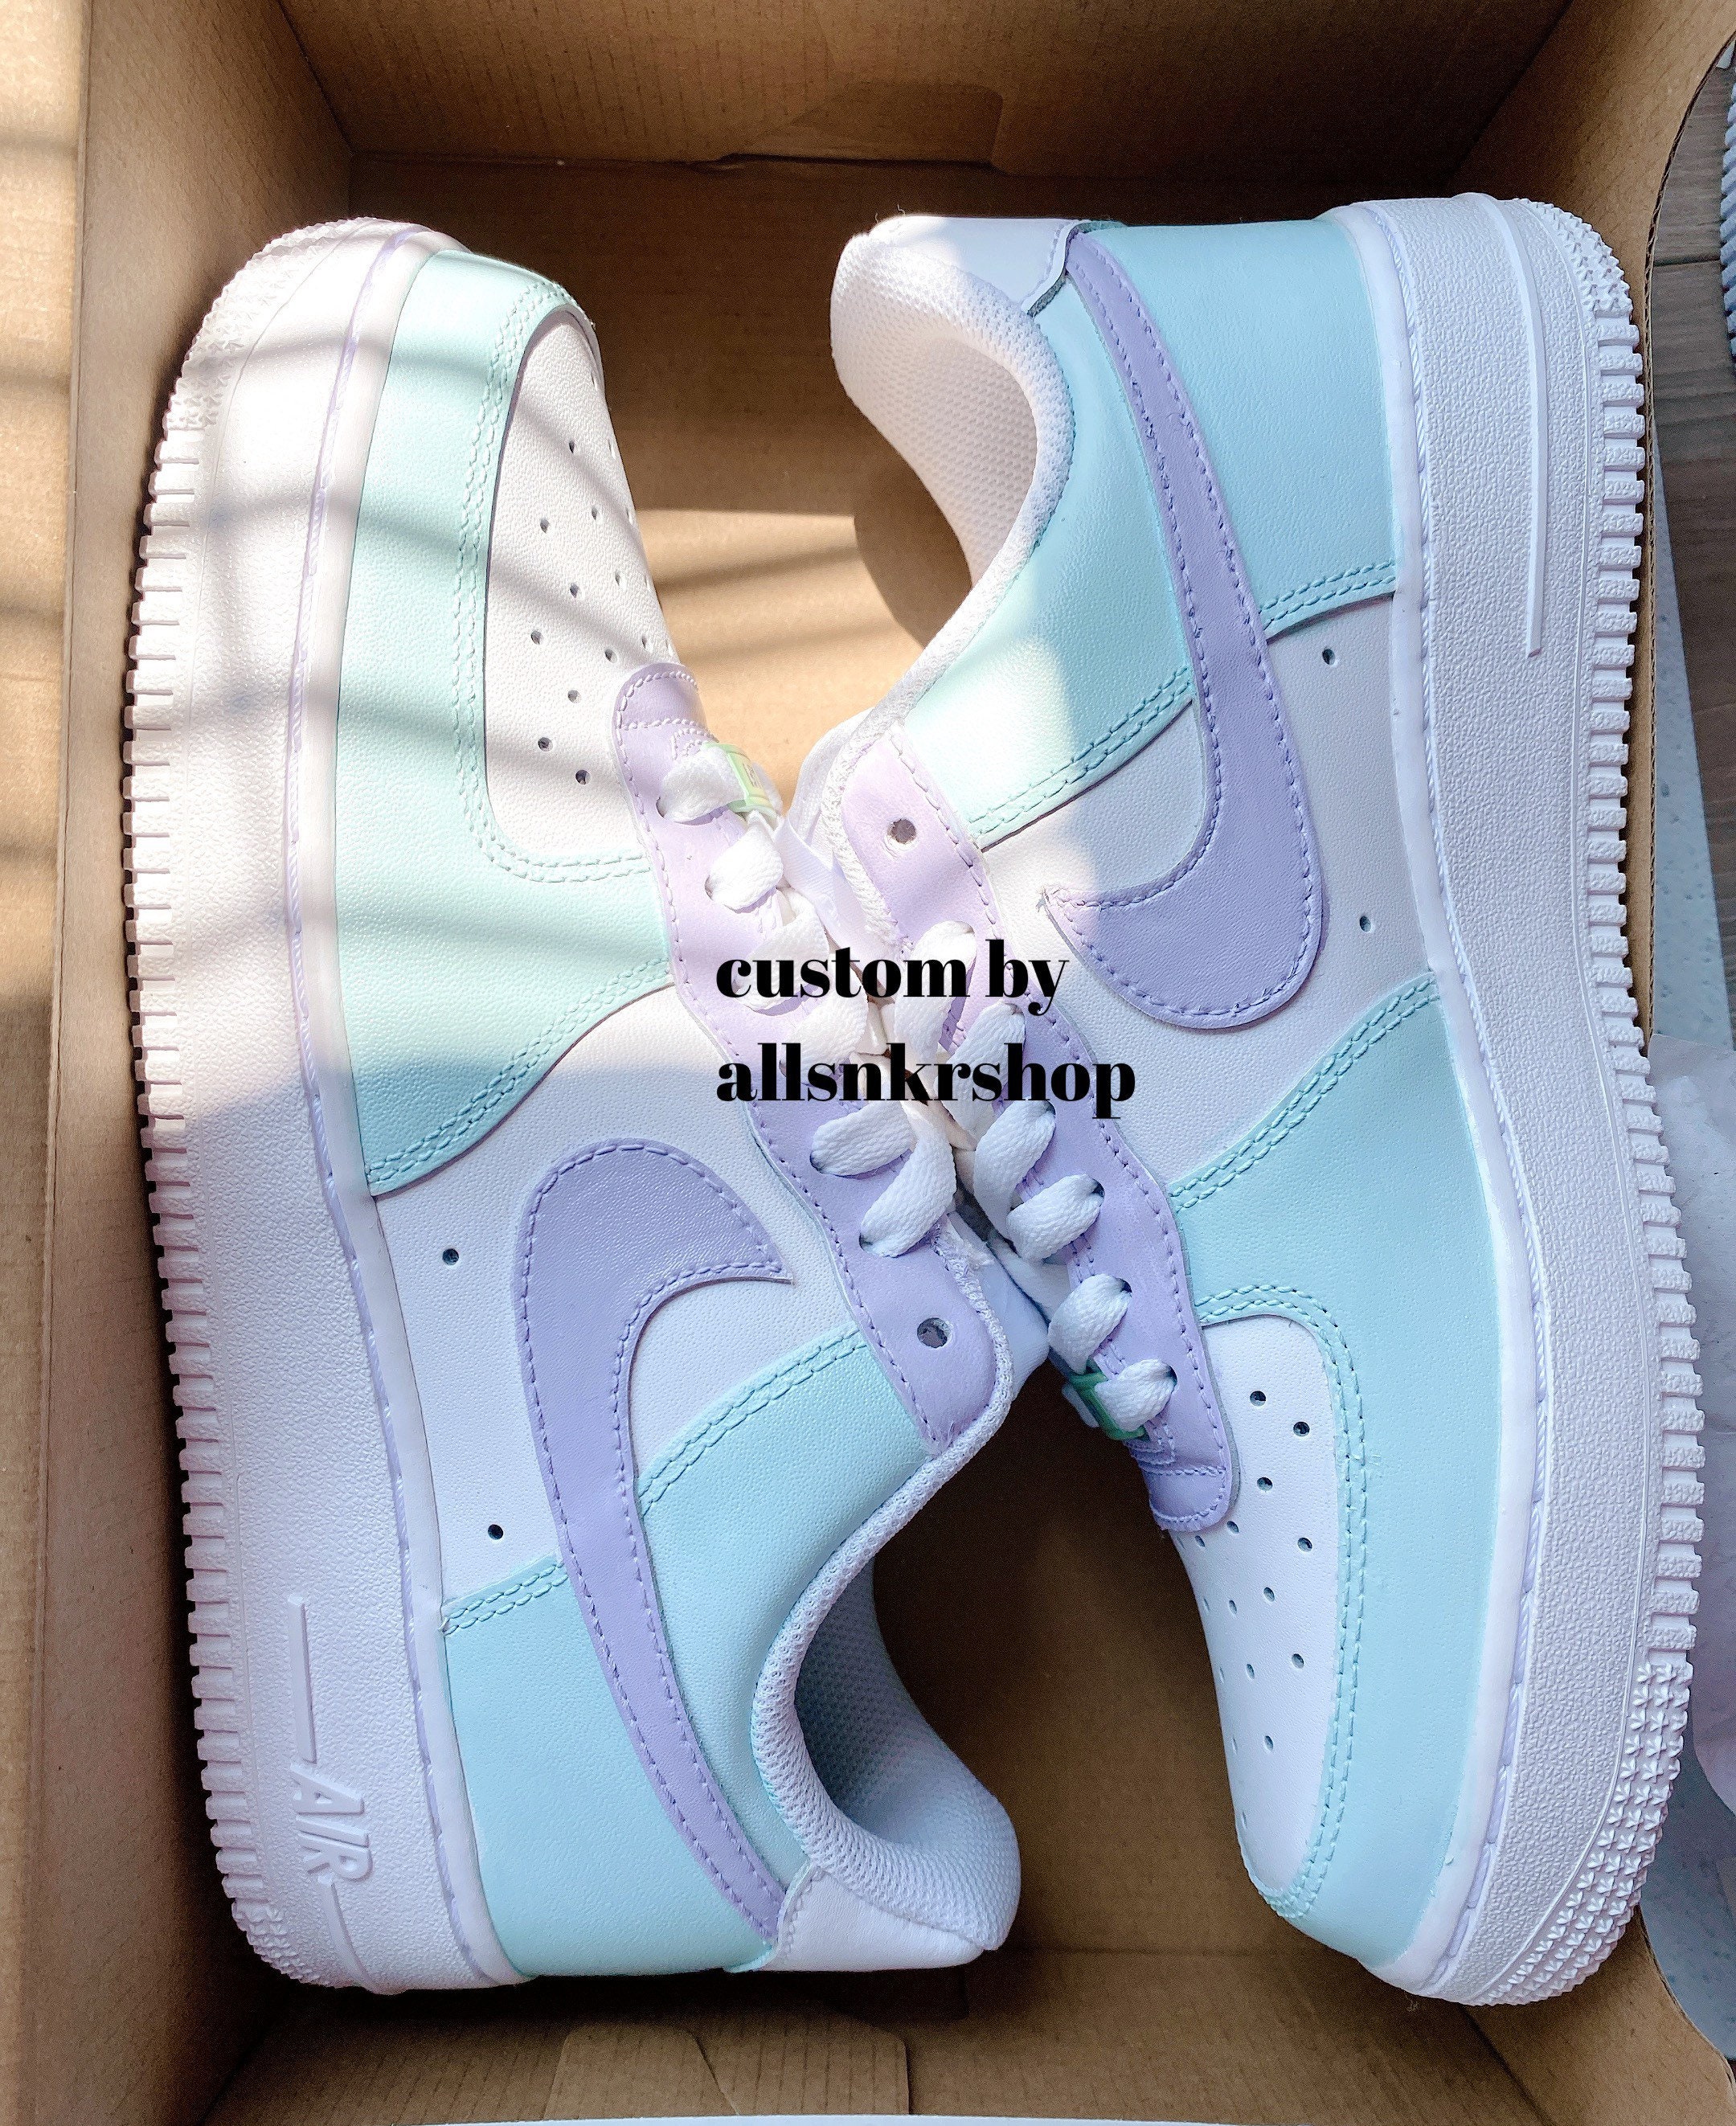 Nike Air Force 1 Custom Sneakers Cotton Candy Blue Pink Purple